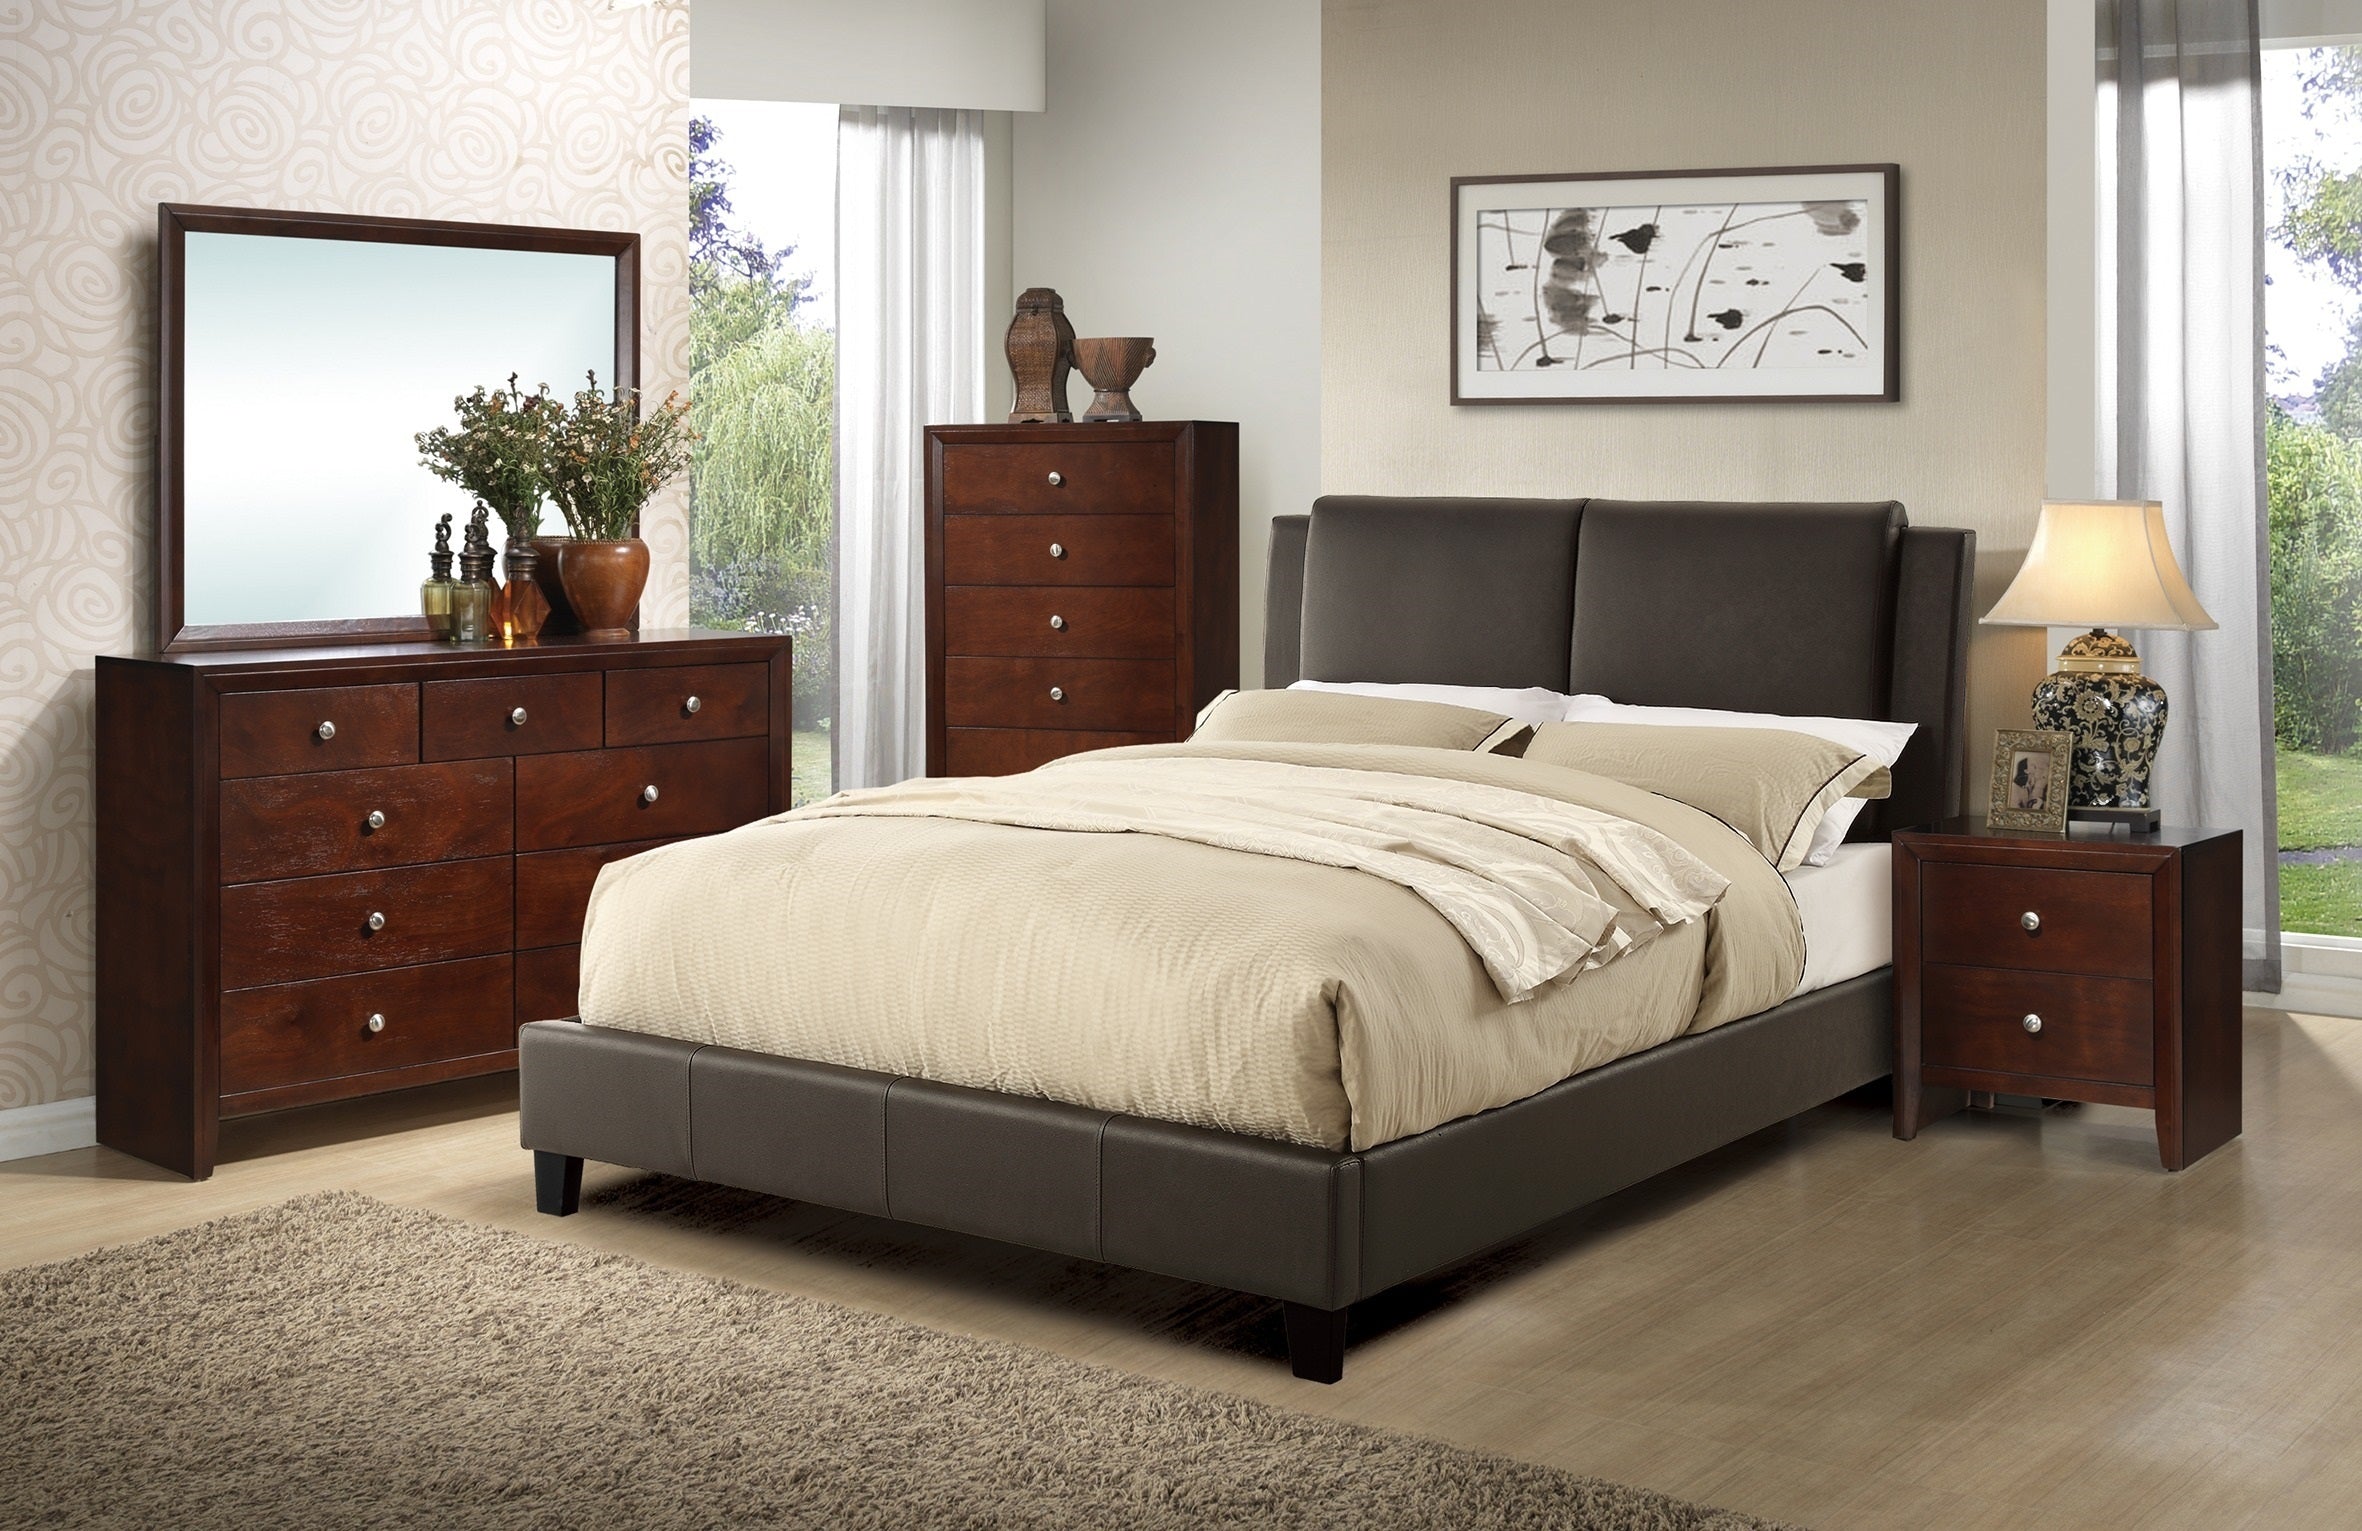 California King Size Bed 1pc  Bed Set Brown Faux Leather Upholstered Two-Panel Bed Frame Headboard Bedroom Furniture - Brown